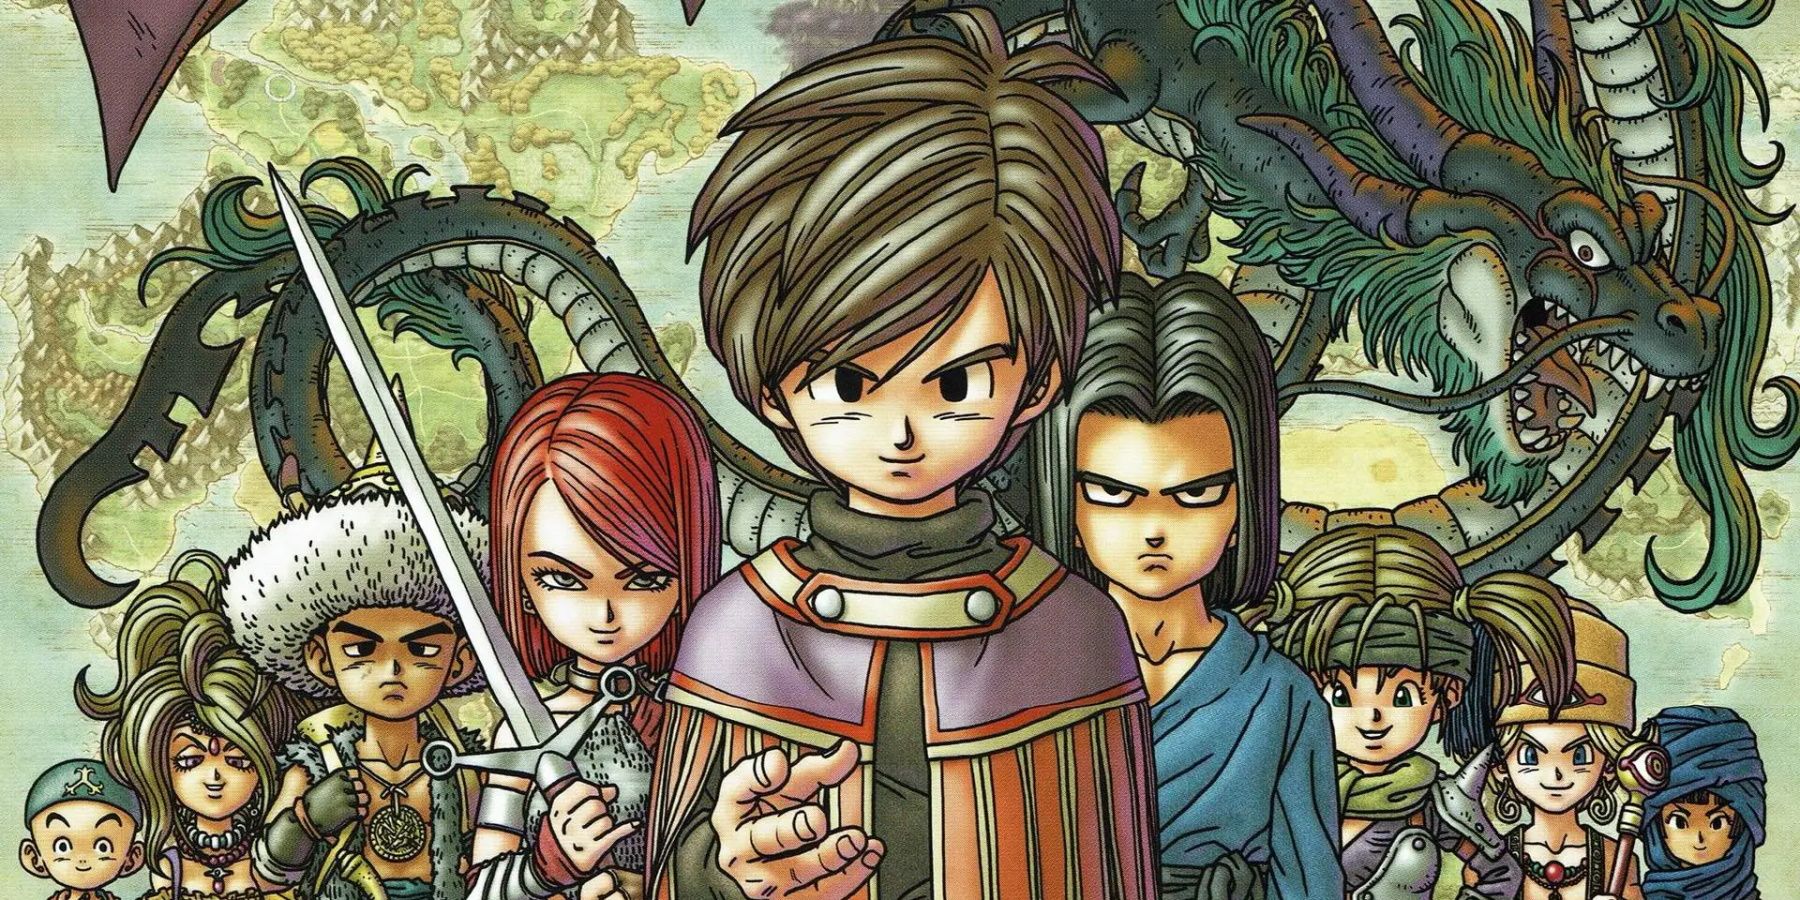 SQUARE ENIX  The Official SQUARE ENIX Website - The DRAGON QUEST VIII  Collaboration Event begins in DRAGON QUEST TACT!